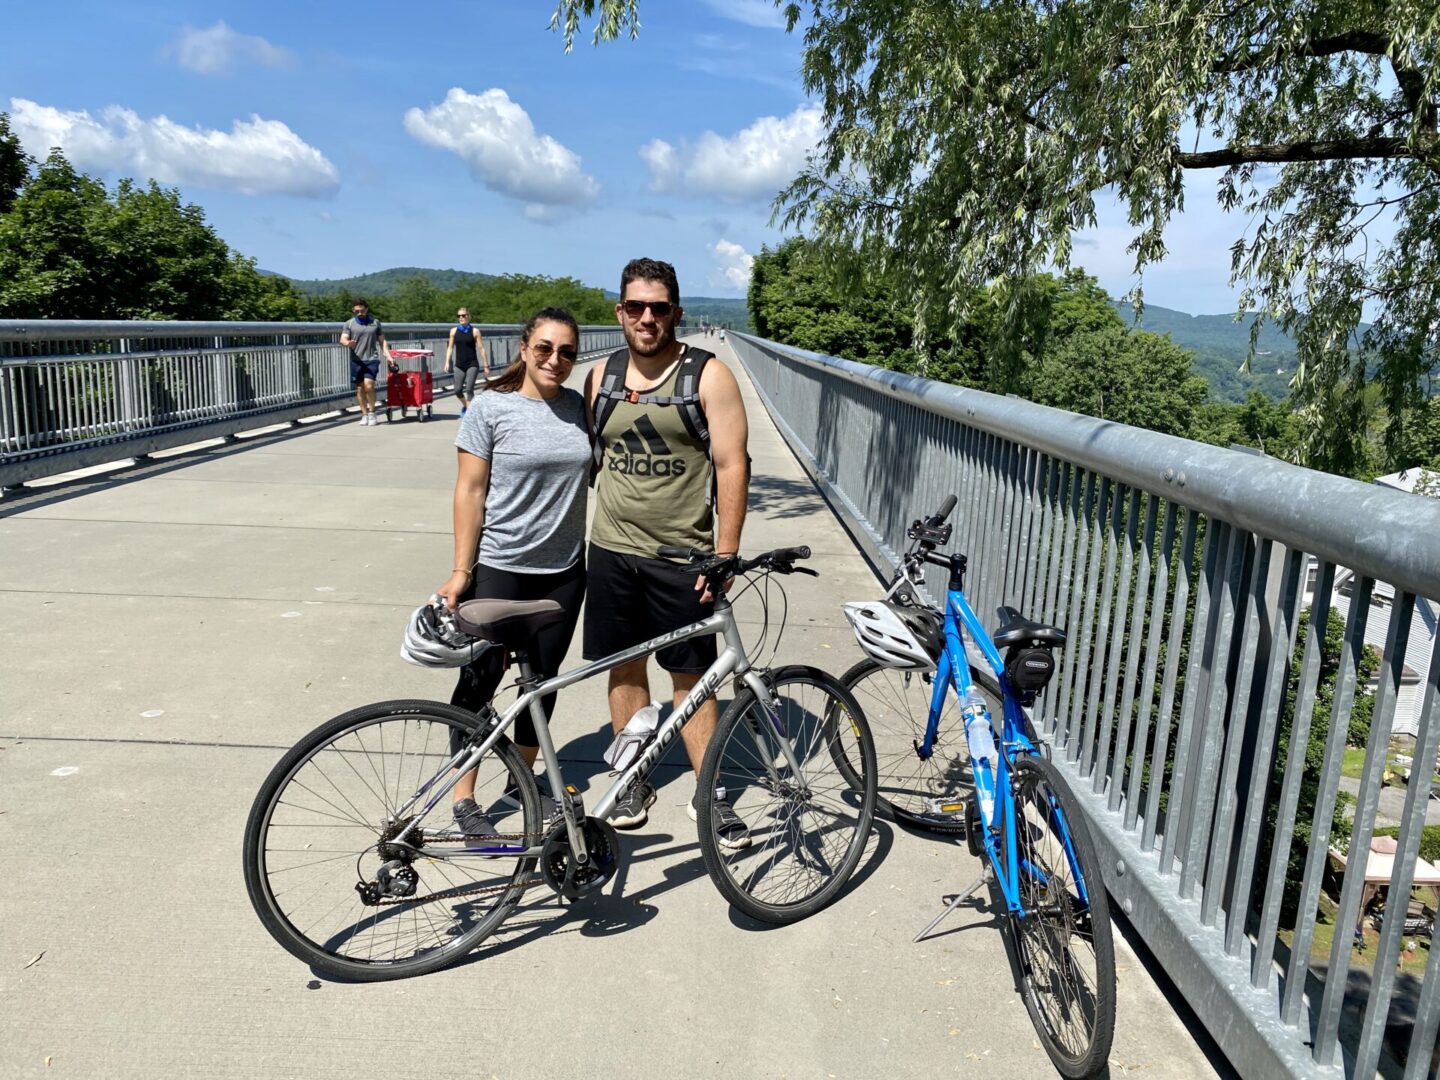 Two people standing next to a bike on the side of a bridge.